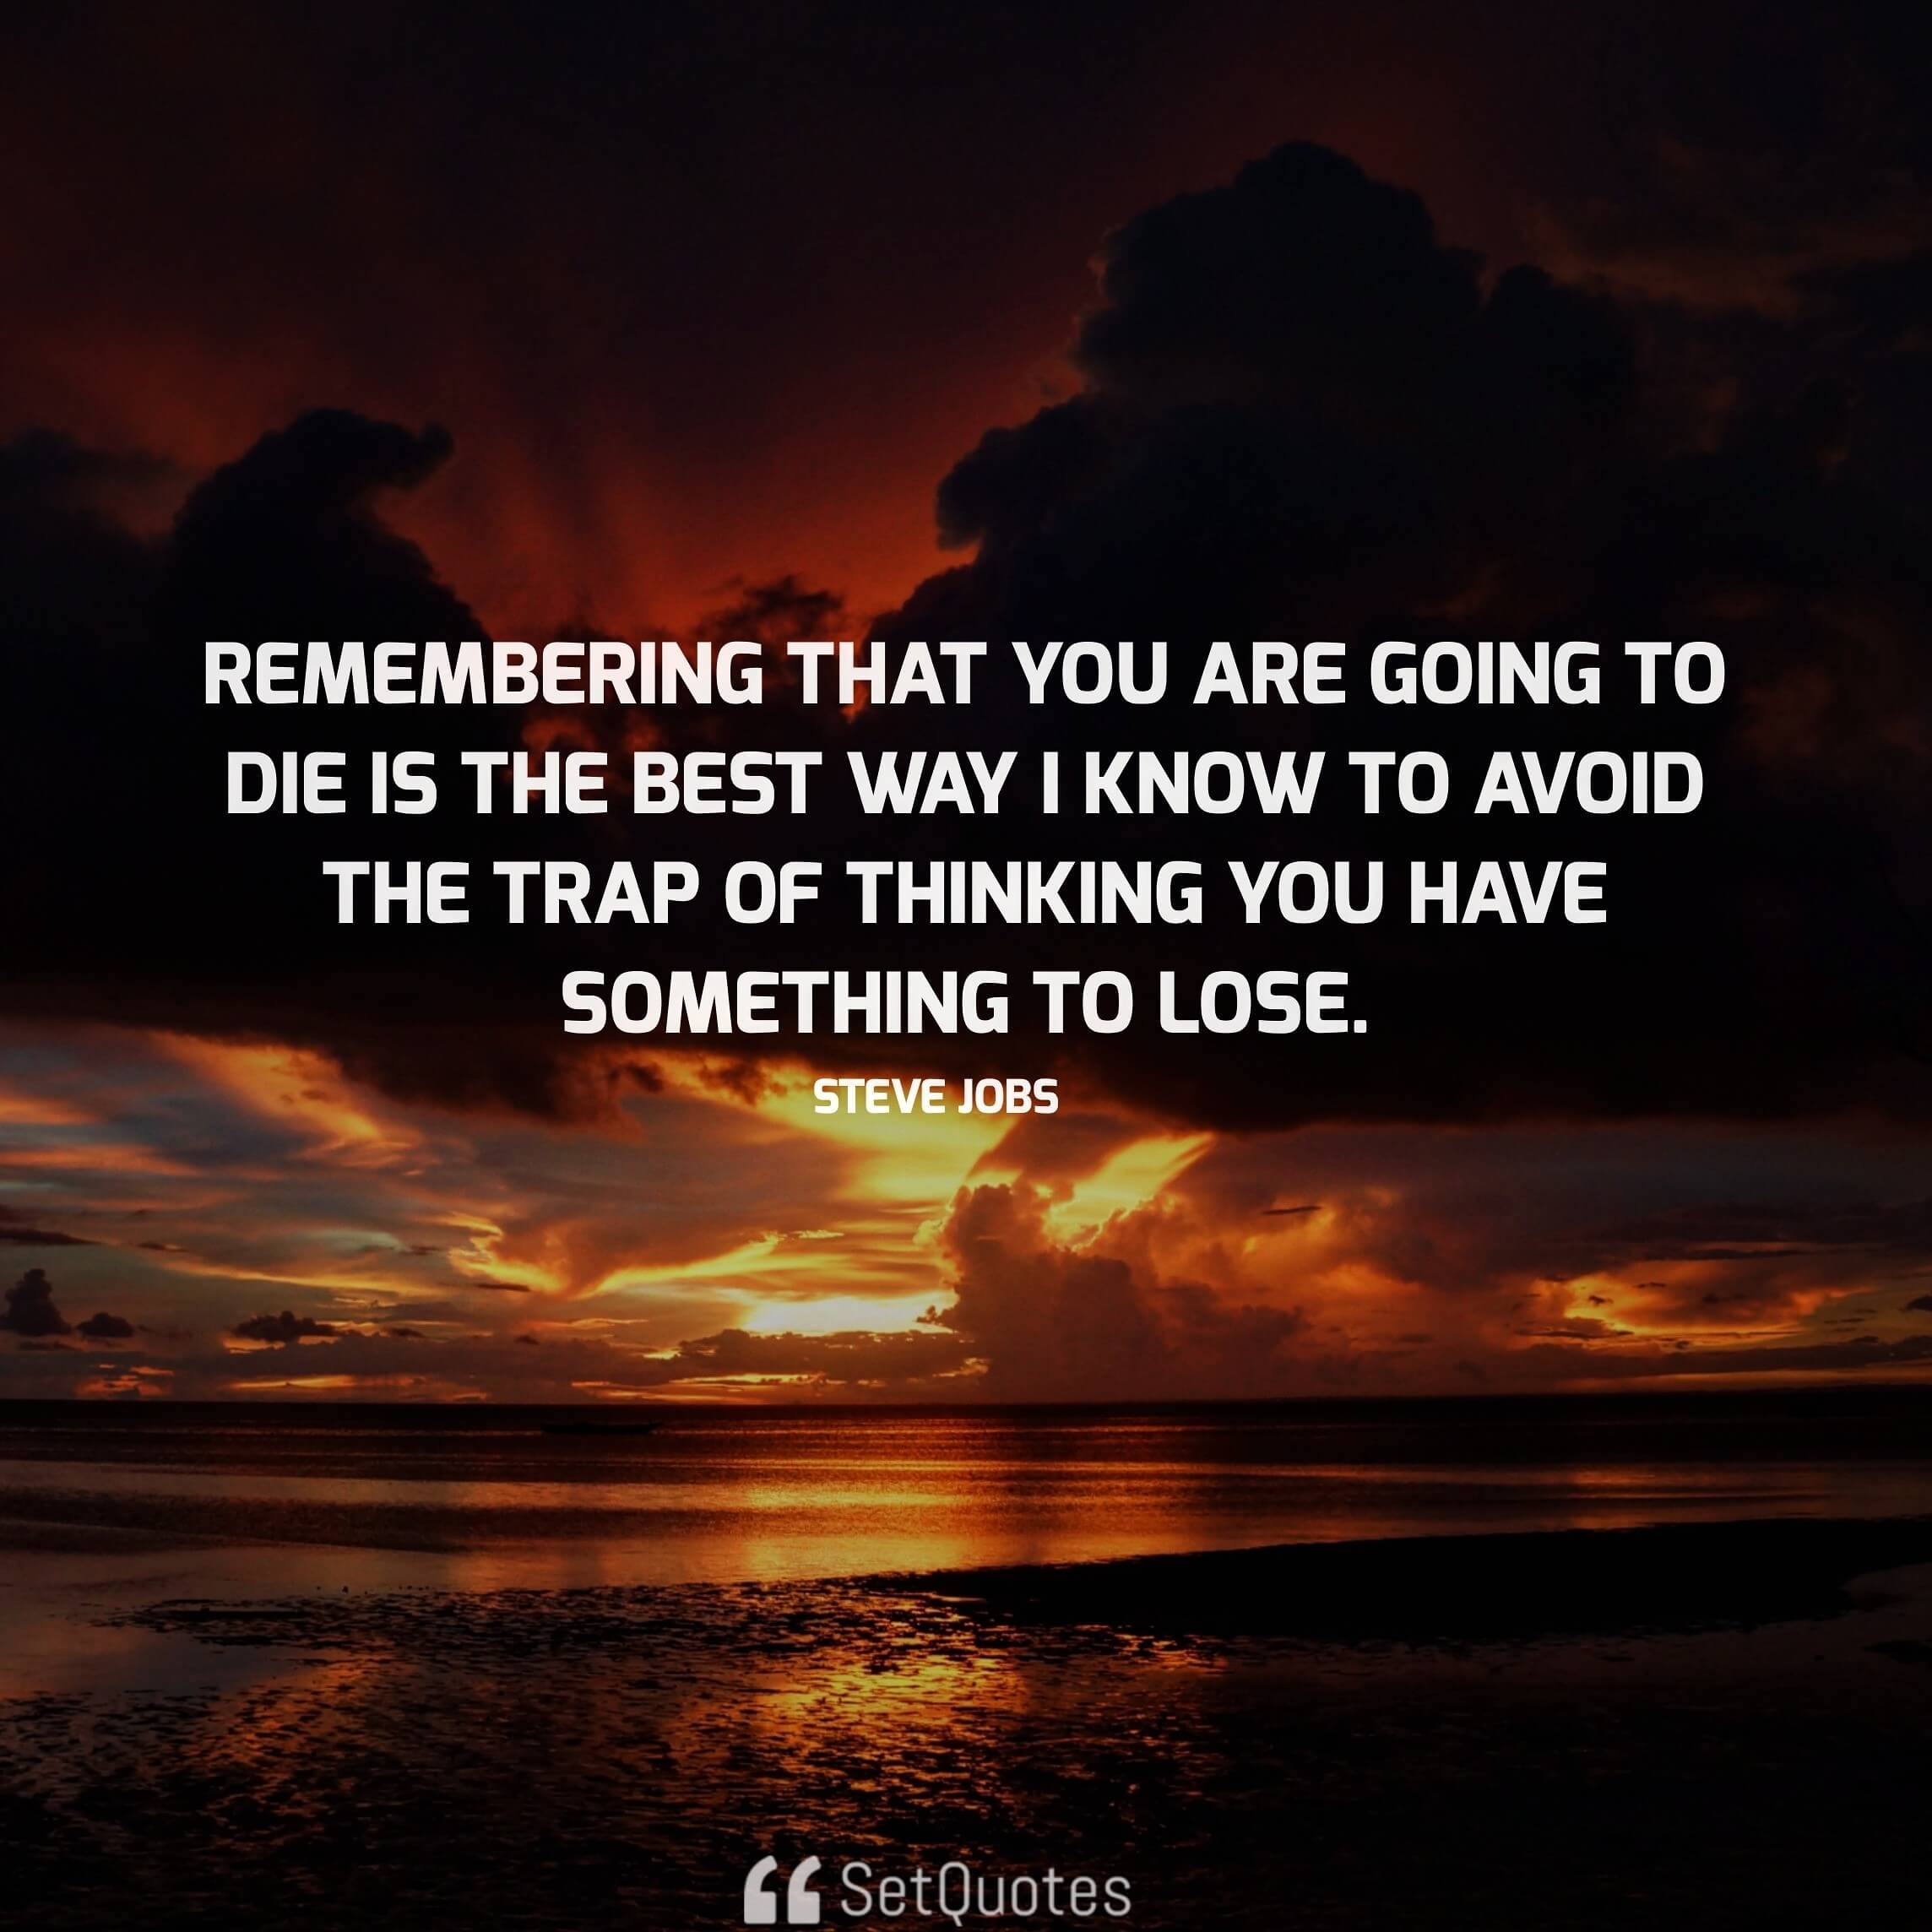 Remembering that you are going to die is the best way I know to avoid the trap of thinking you have something to lose. - steve jobs quotes